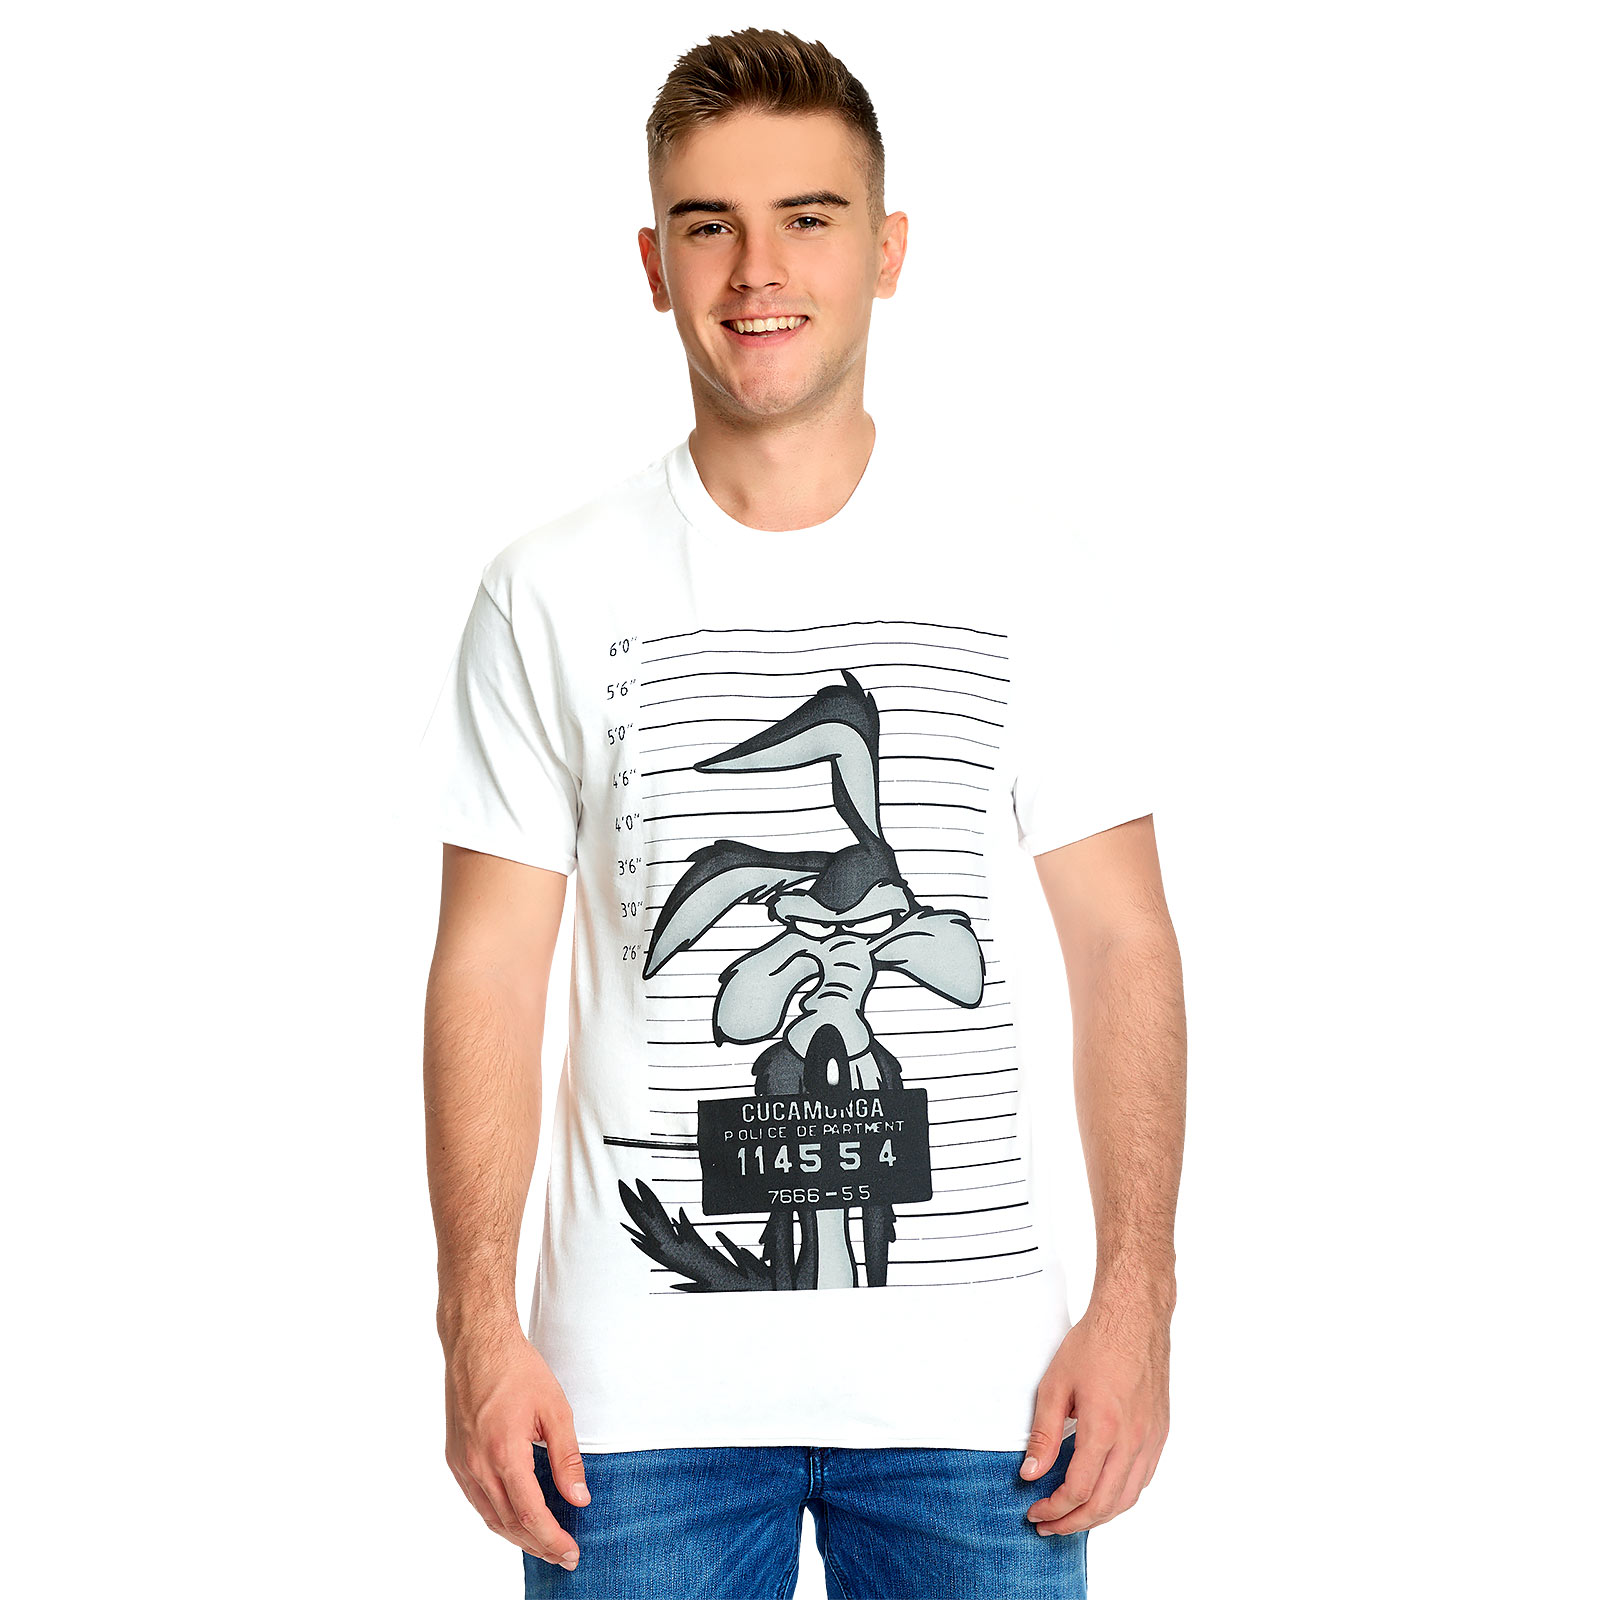 Looney Tunes - Wile E. Coyote Mugshot T-Shirt wit